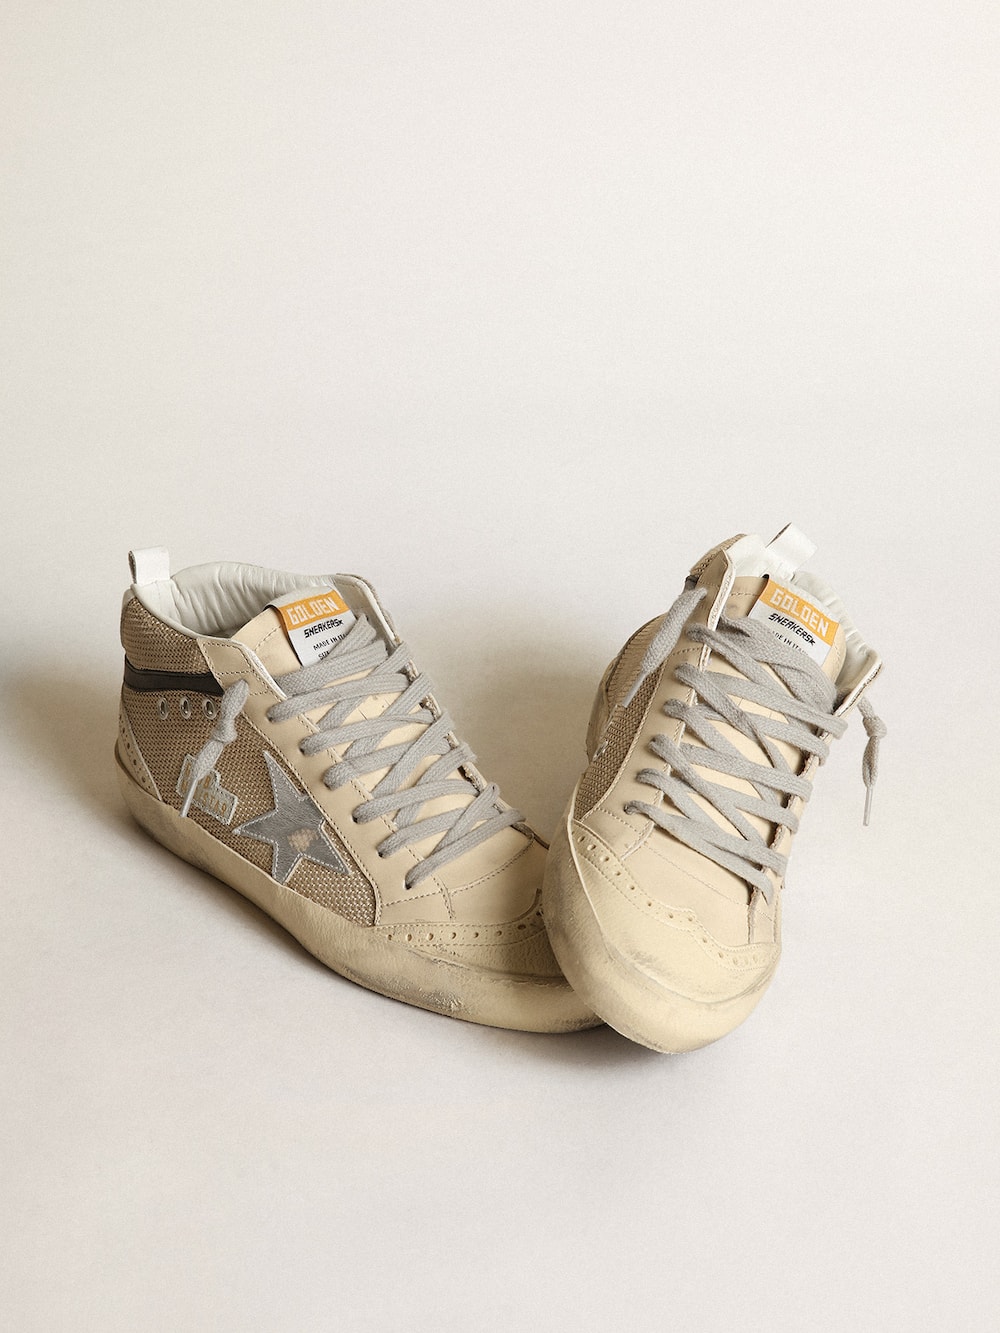 Golden Goose - Women's Mid Star LTD in cream-colored mesh with silver star in 